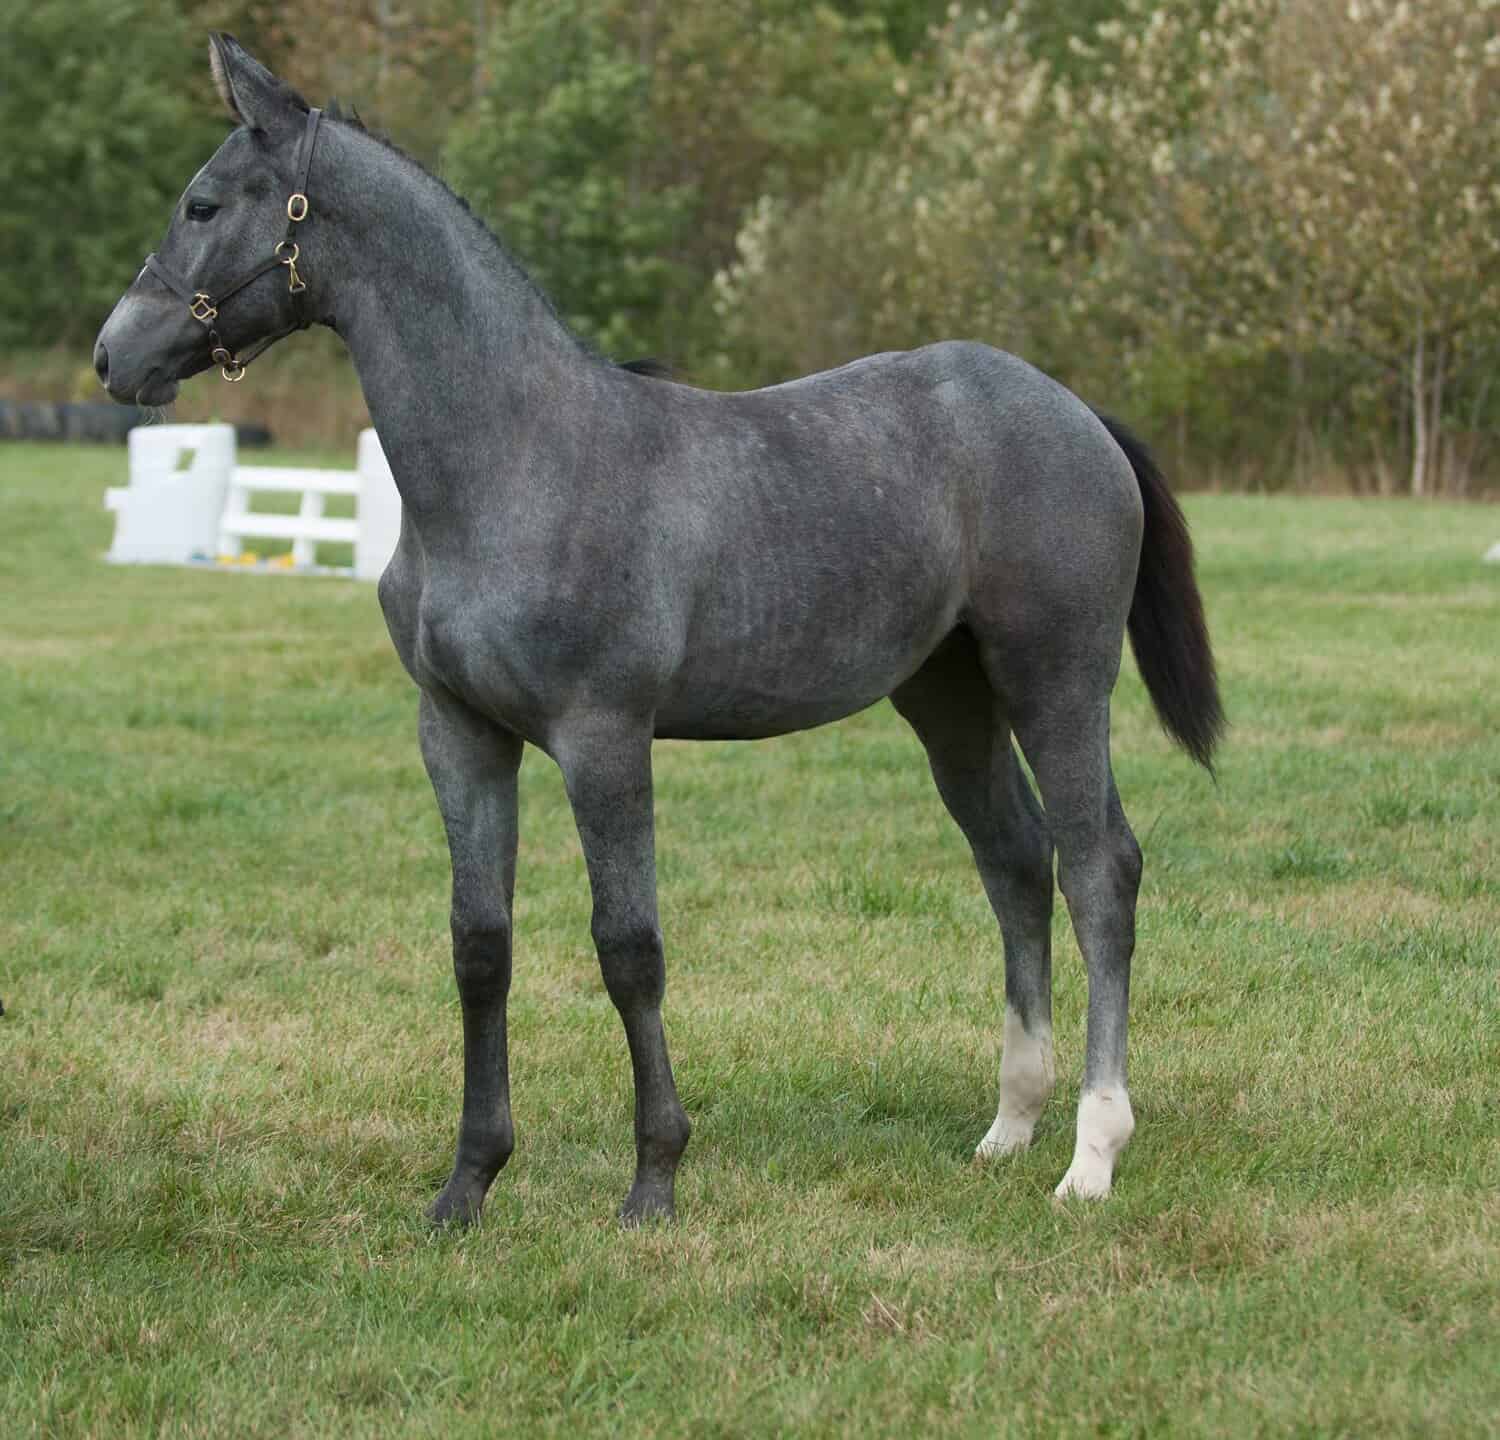 hanoverian yearling standing in conformation stance grey color two white hind socks standing in grass with leather halter as tack muscled young colt or filly purebred hanoverian horse breeding stock 